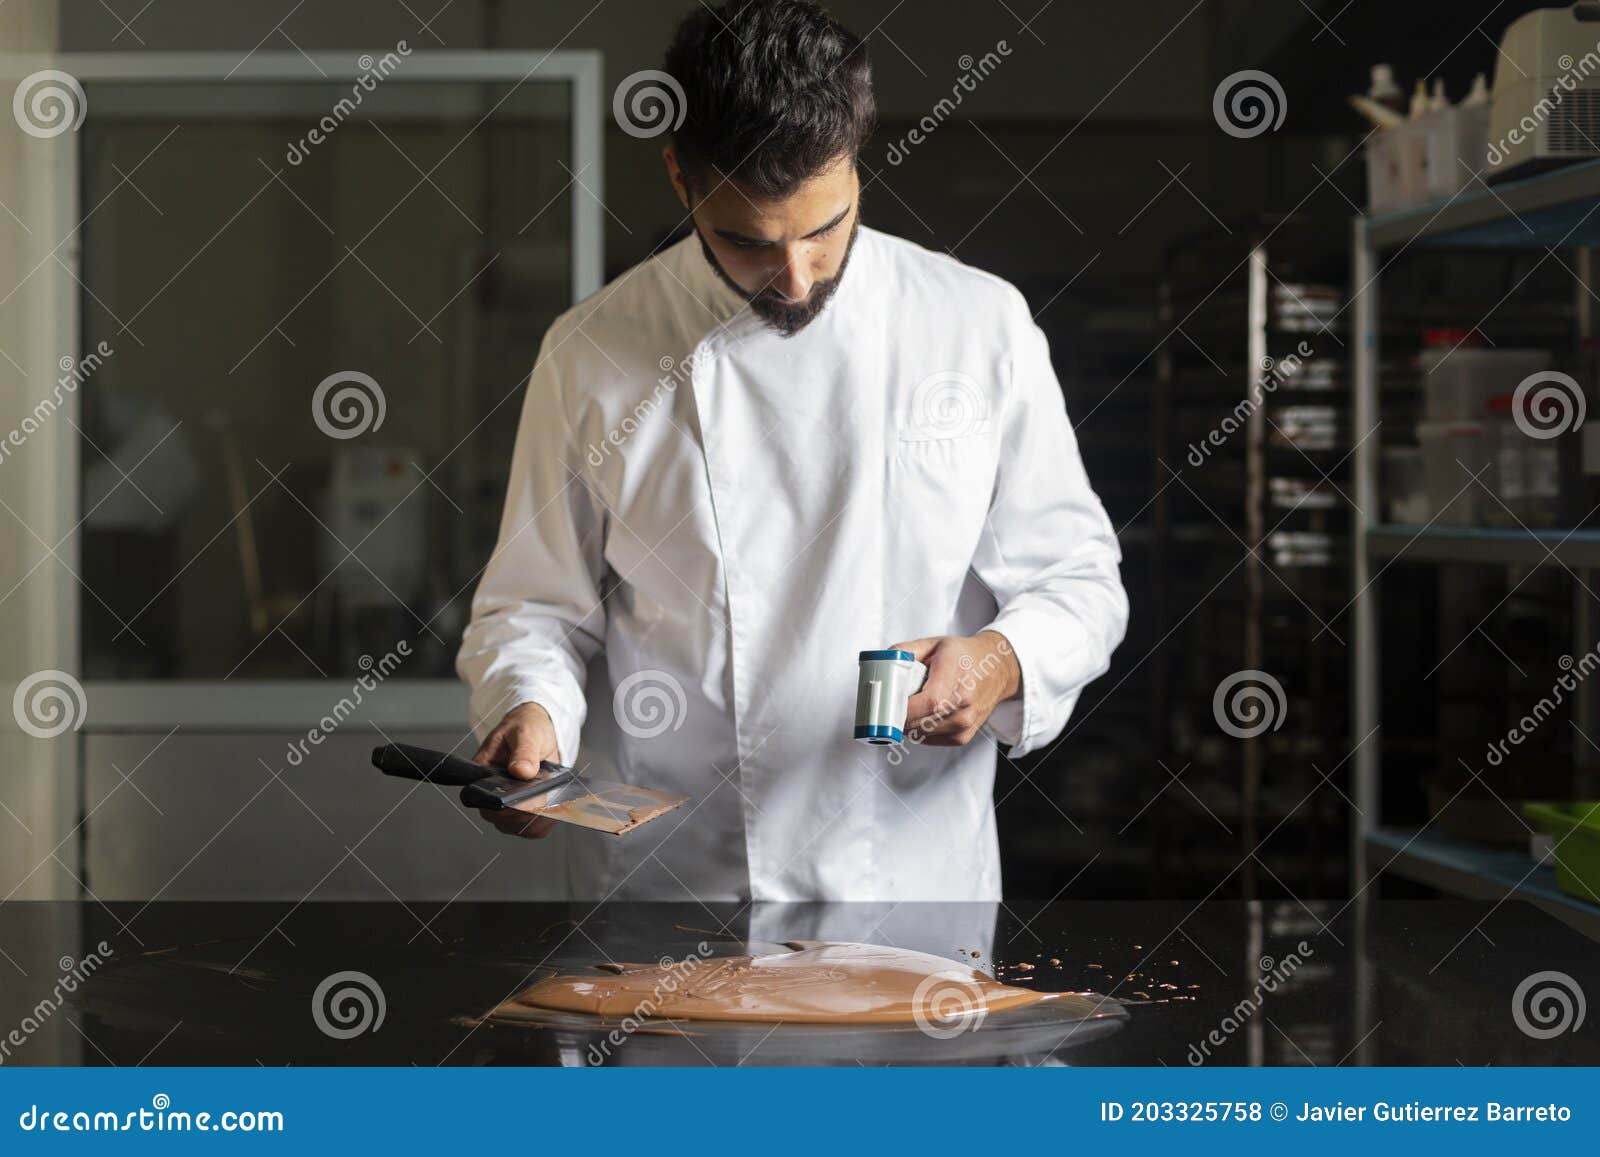 https://thumbs.dreamstime.com/z/pastry-chef-measuring-temperature-chocolate-infrared-thermometer-working-tempering-portrait-203325758.jpg